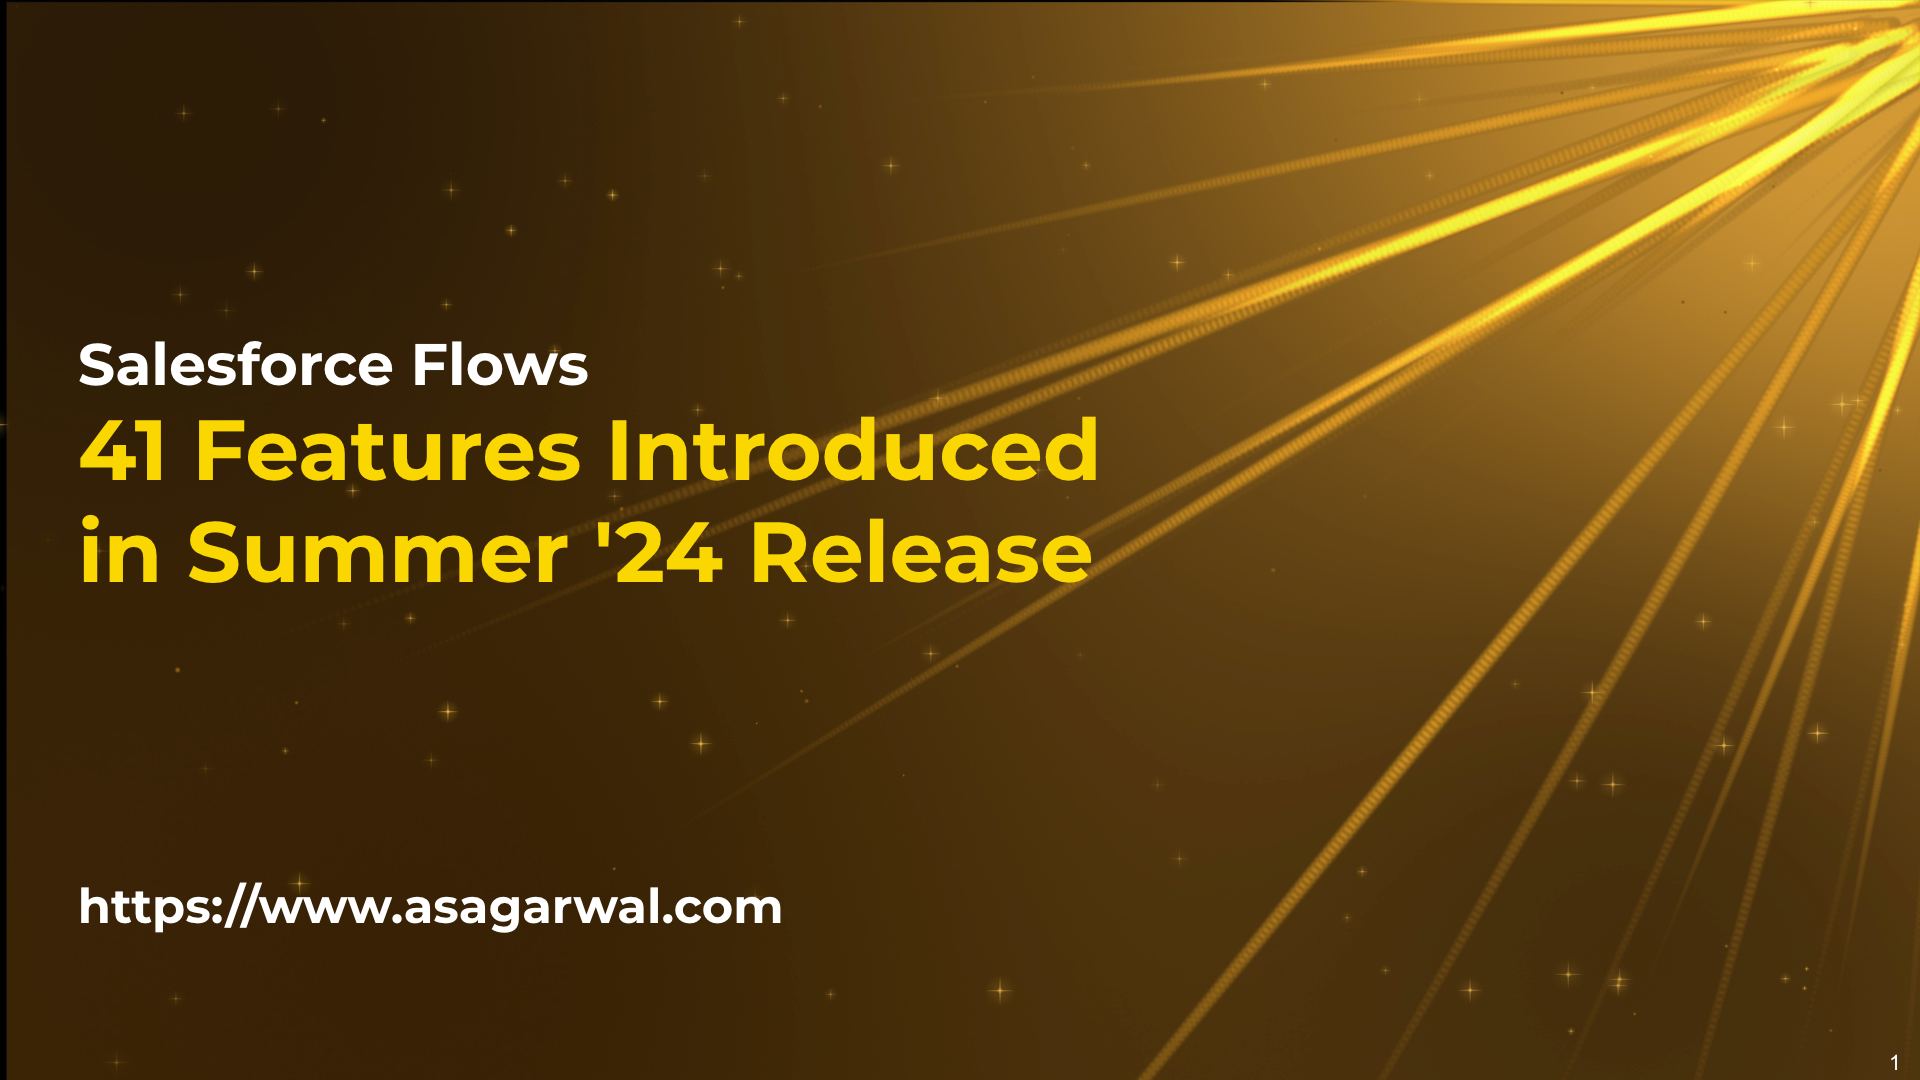 Salesforce Flows - 41 Features Introduced in Summer '24 Release